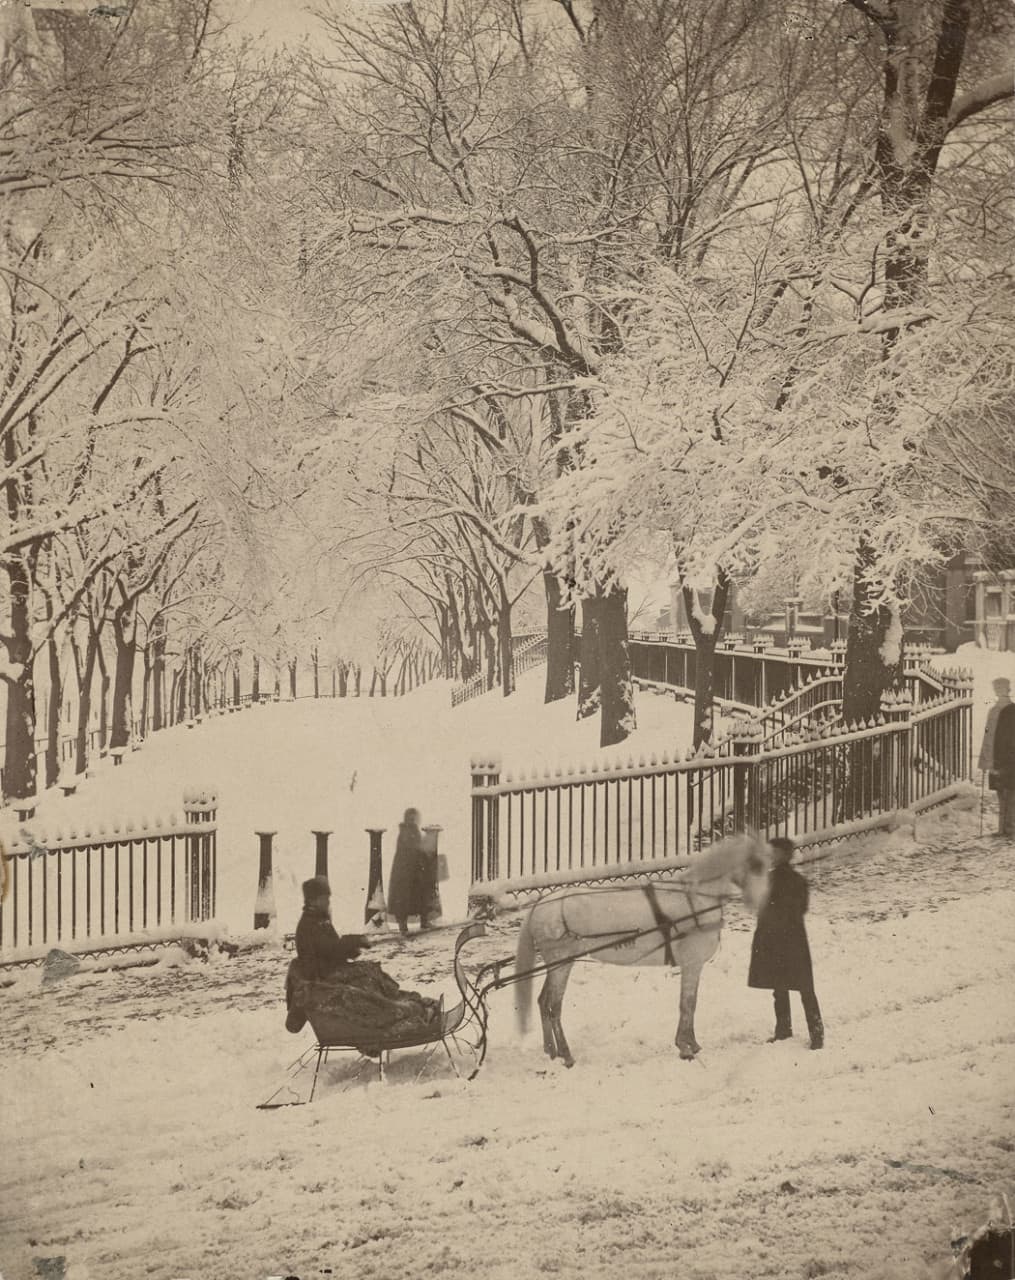 A horse-drawn sleigh pauses in the foreground of "Snow Scene on the Northeast Corner of the Boston Common” from around 1875 by the celebrated Boston photographer Josiah Johnson Hawes. (Museum of Fine Arts, Boston)